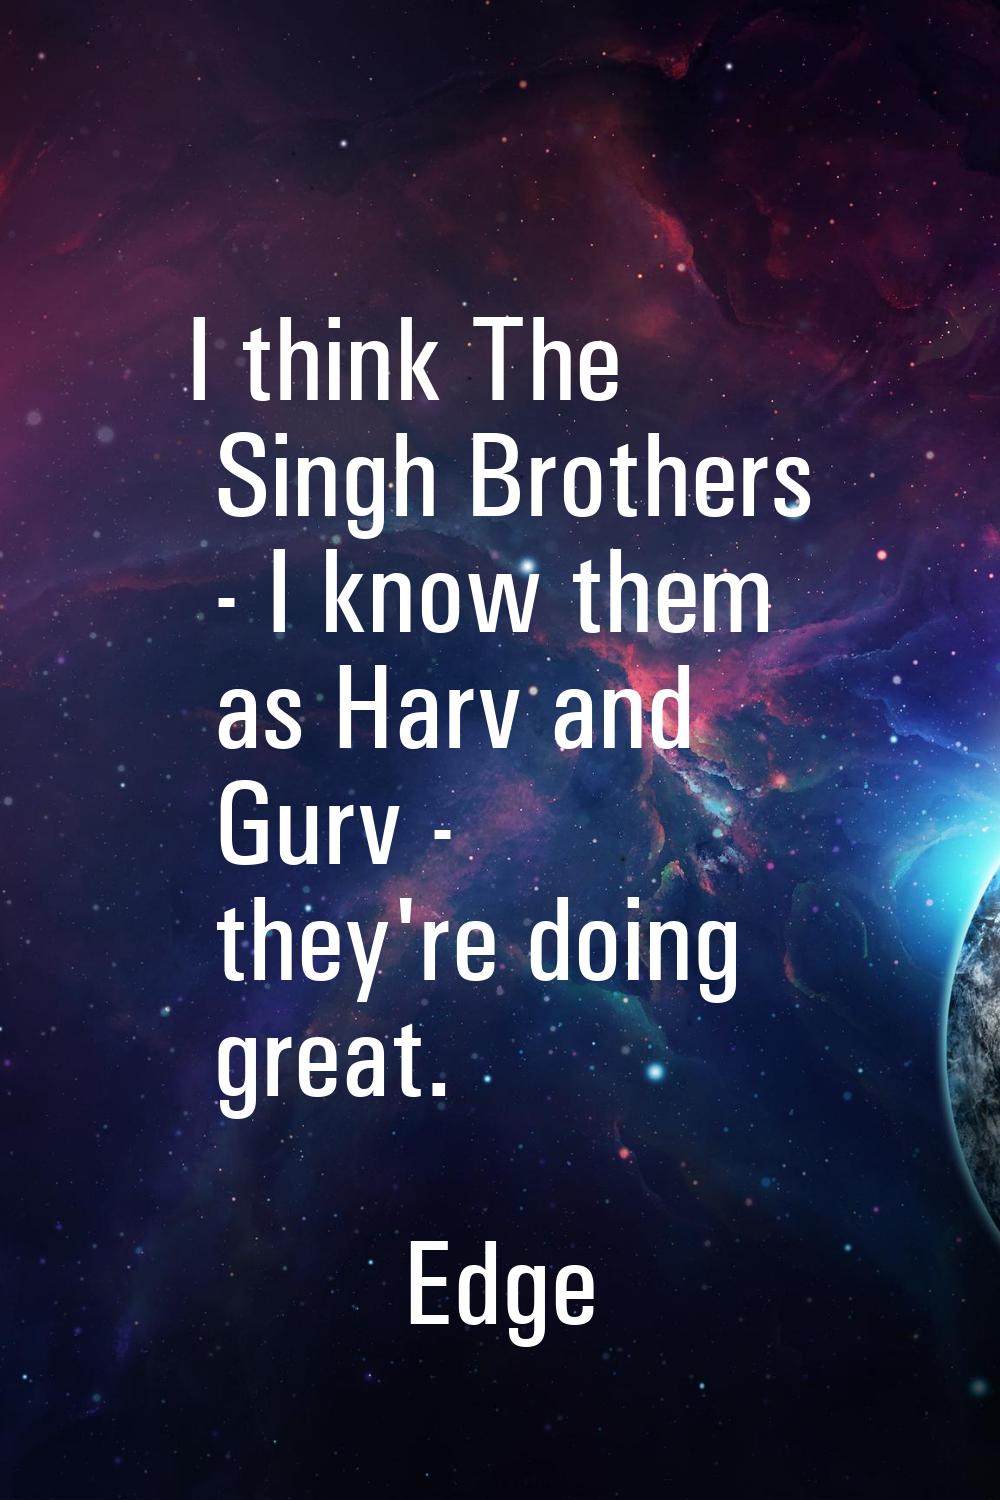 I think The Singh Brothers - I know them as Harv and Gurv - they're doing great.